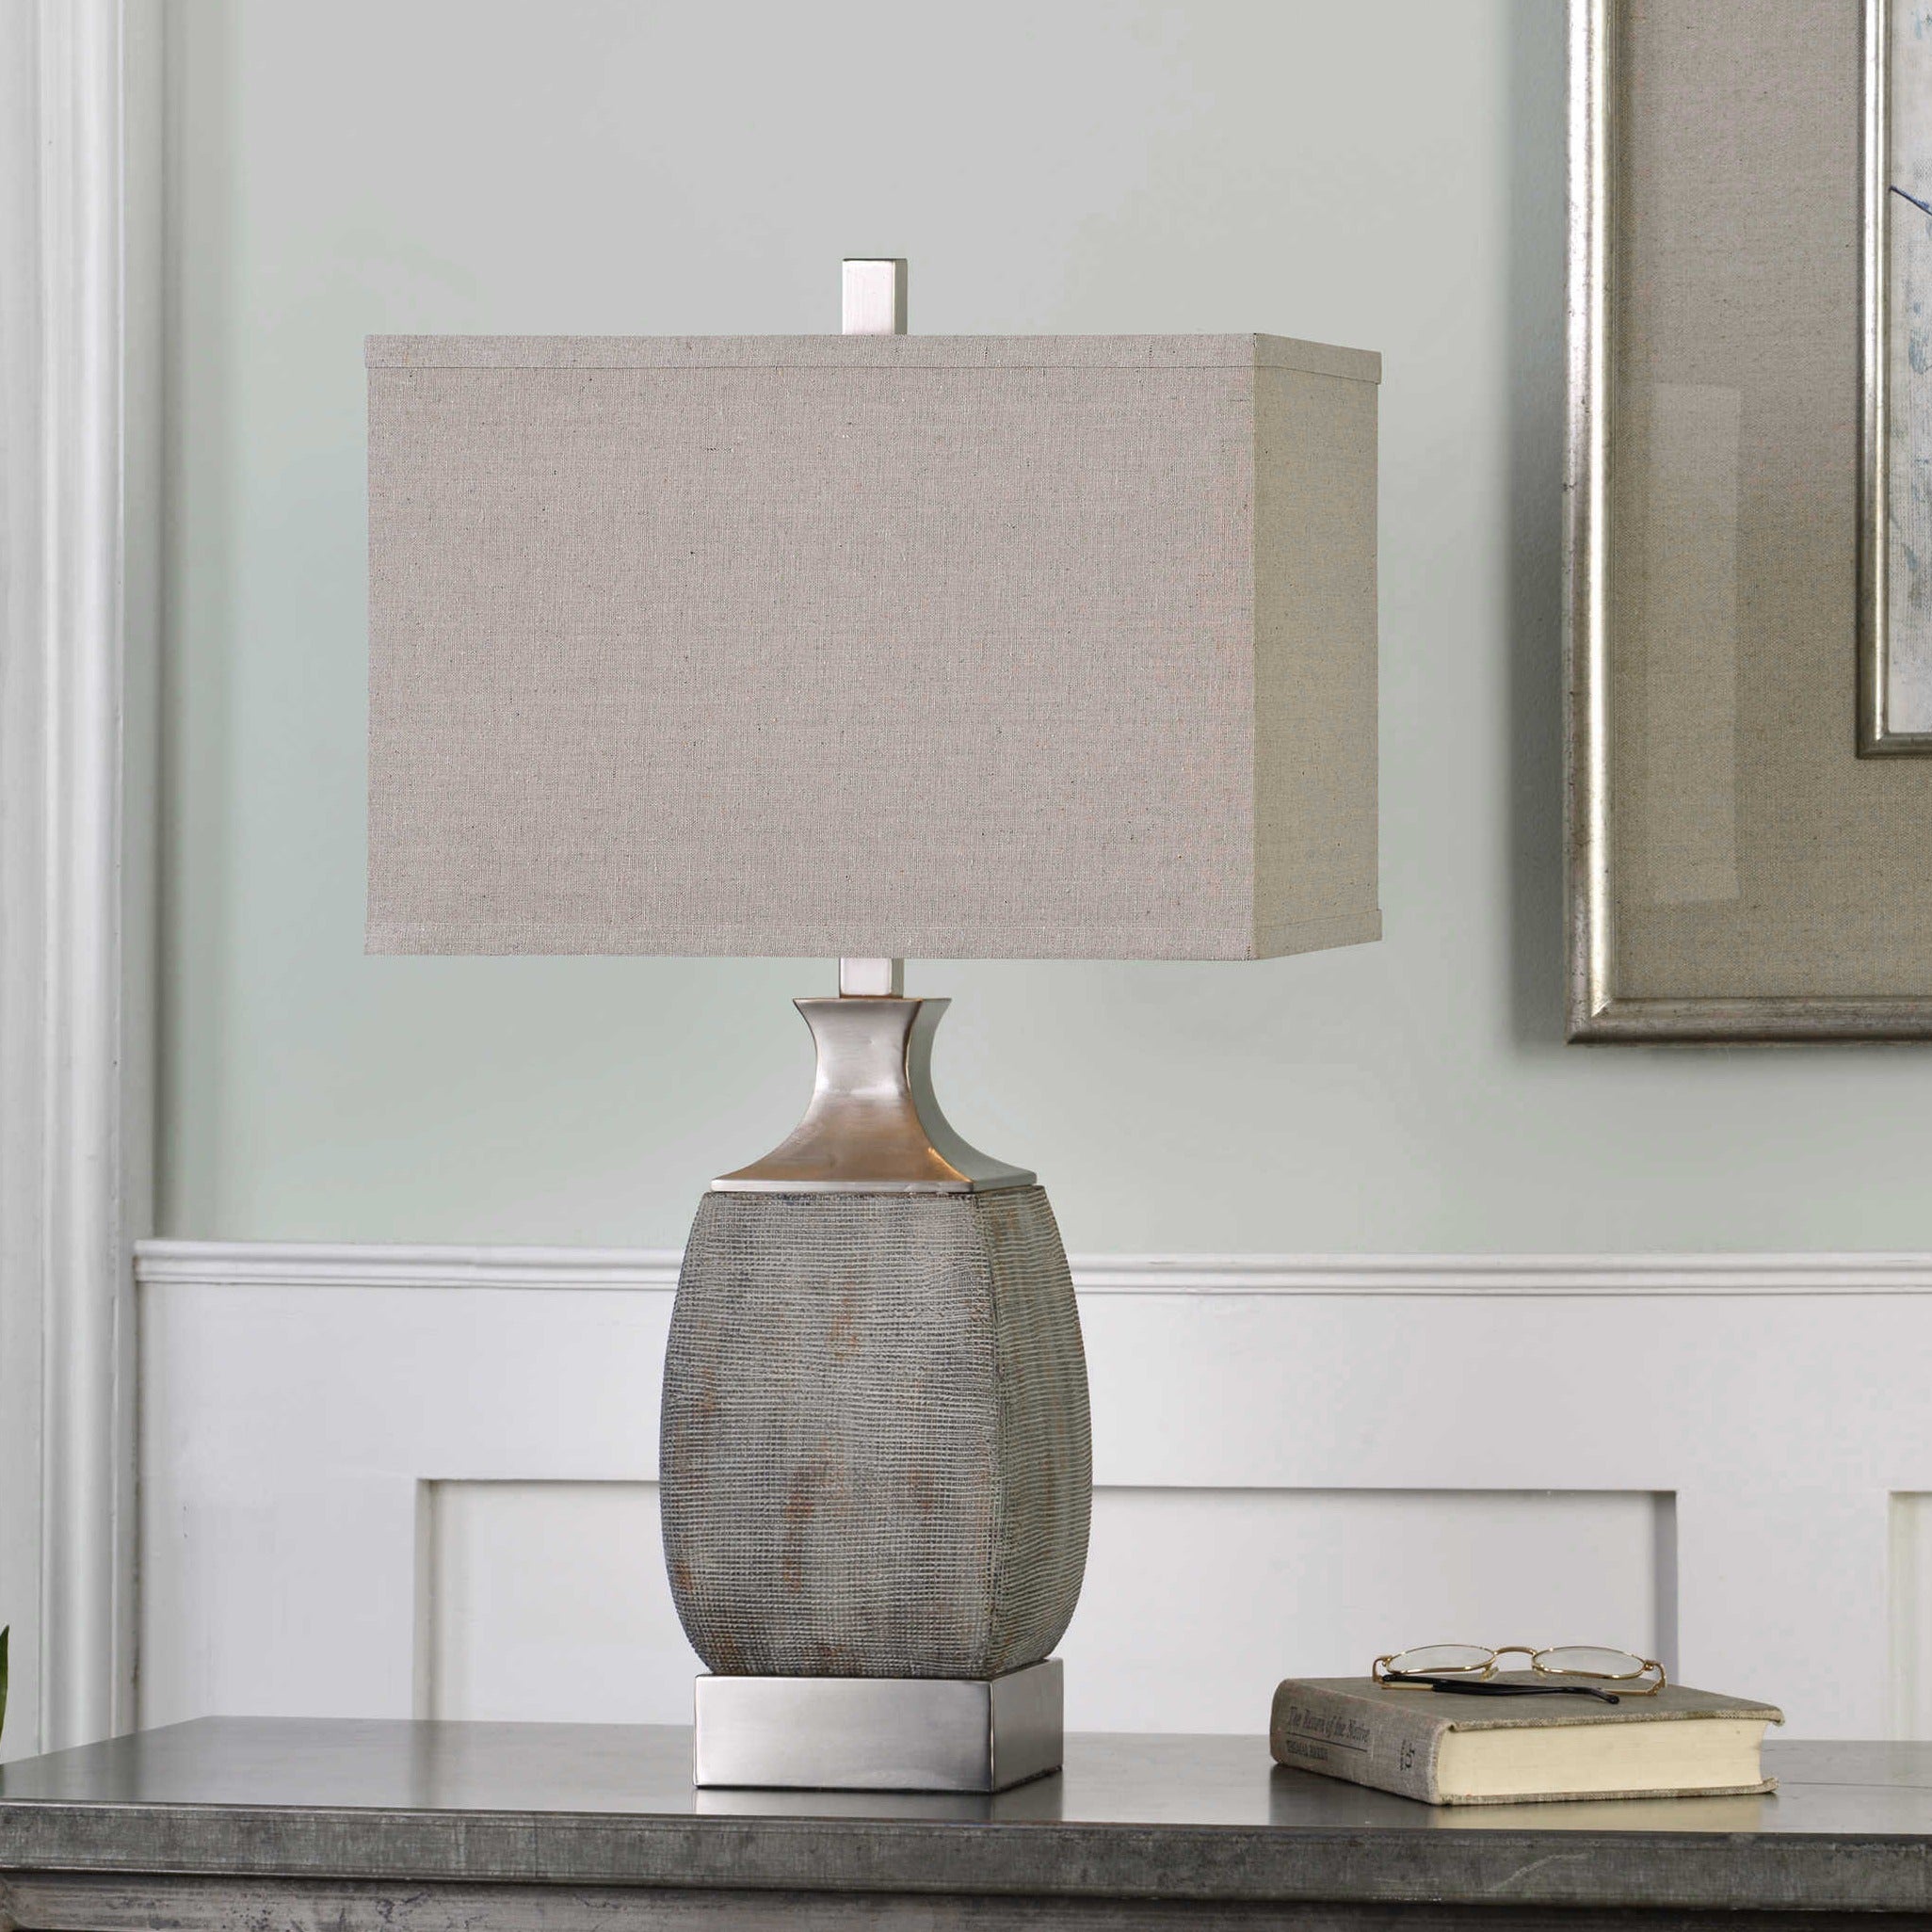 Lamp, Caffaro - Danshire Market and Design , Heavily textured rust bronze ceramic accented with brushed nickel plated metal details. The rectangle hardback drum shade is a light beige linen fabric. 28"